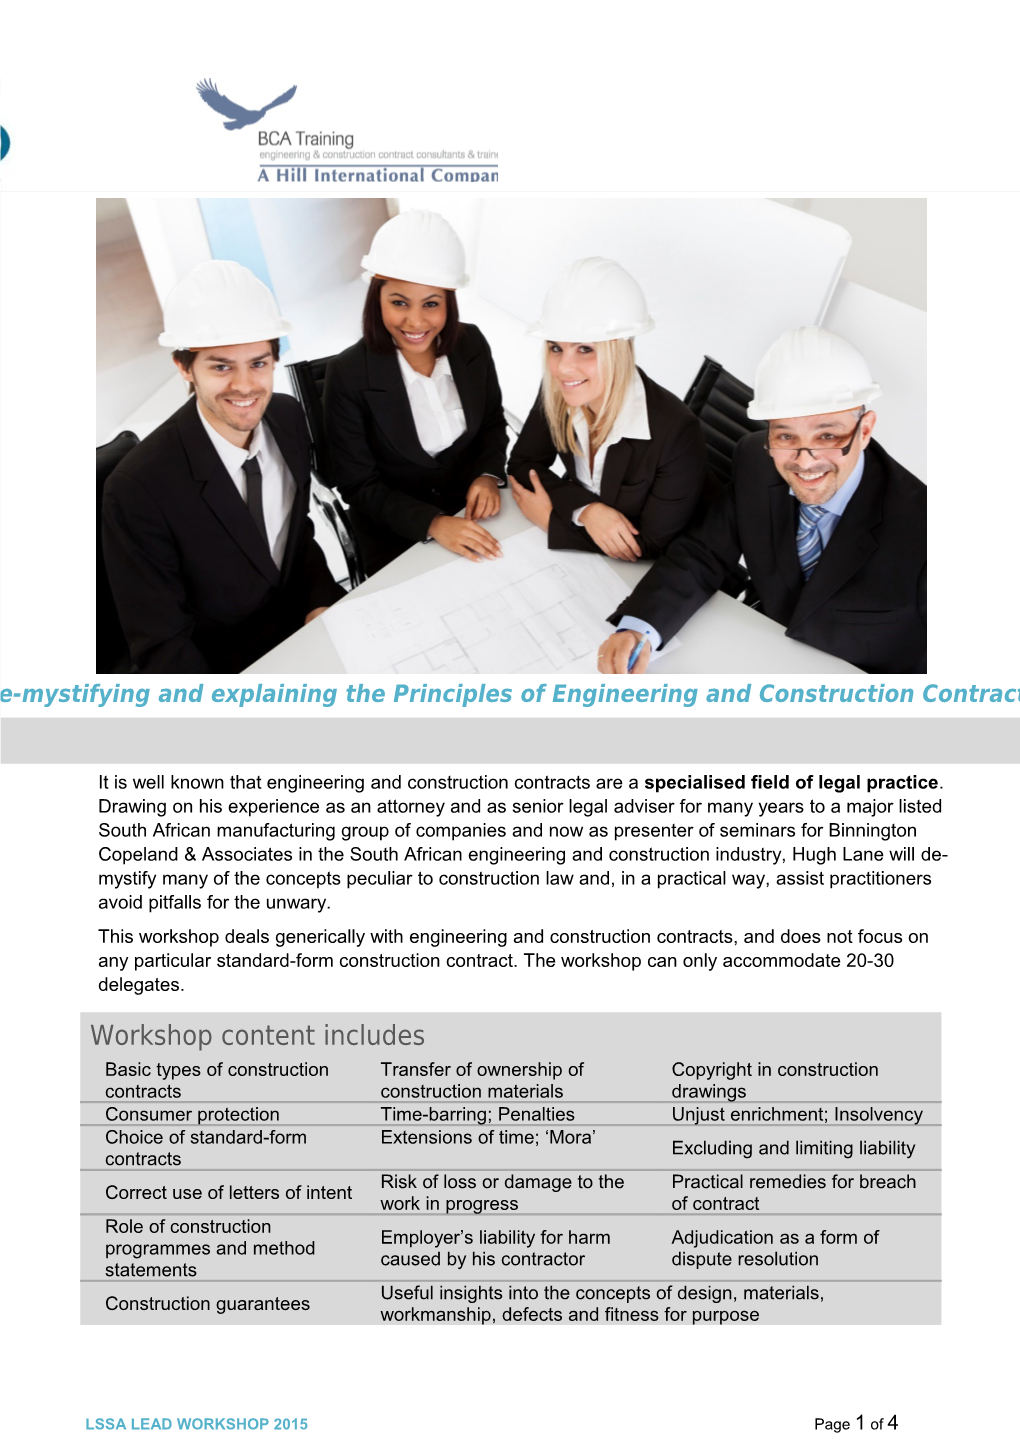 It Is Well Known That Engineering and Construction Contracts Are a Specialised Field Of